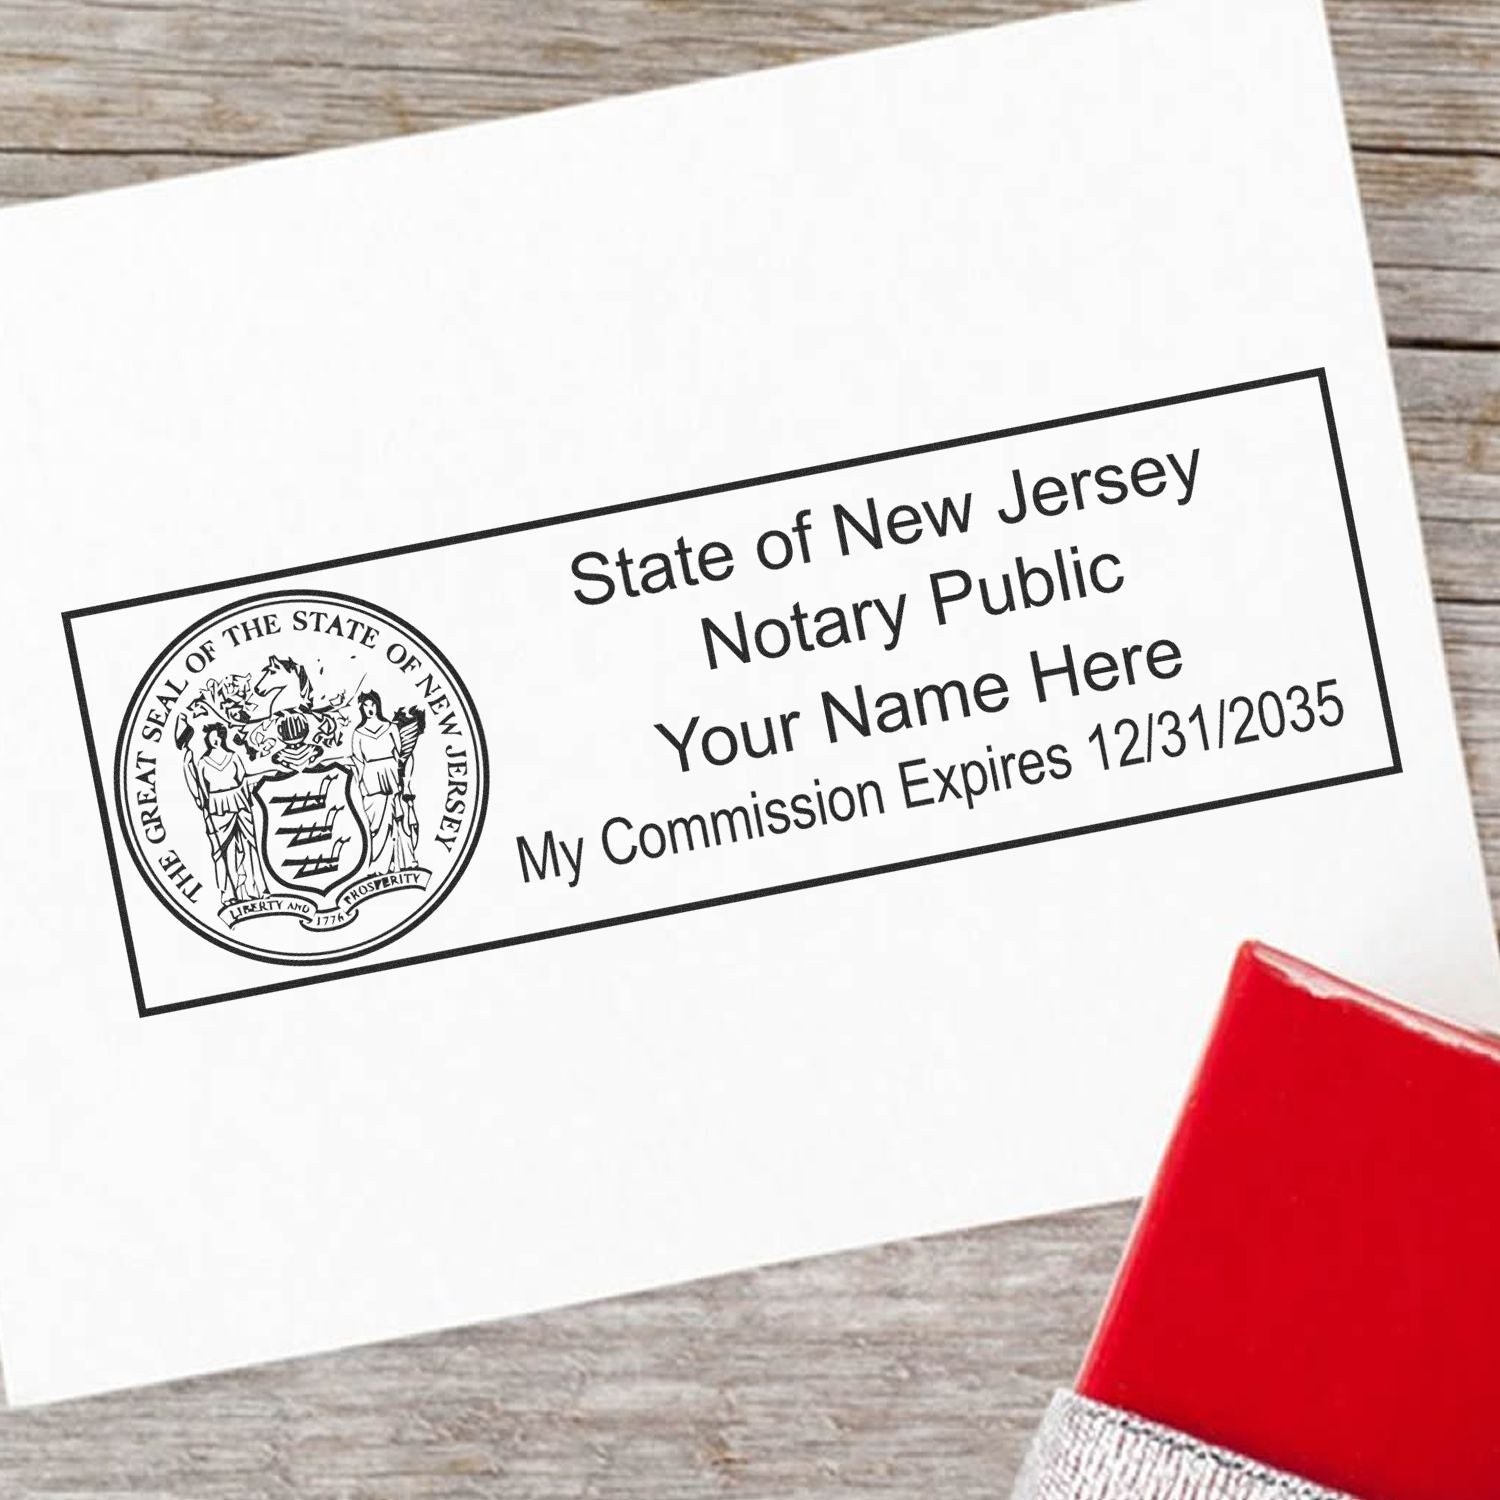 The main image for the Wooden Handle New Jersey State Seal Notary Public Stamp depicting a sample of the imprint and electronic files